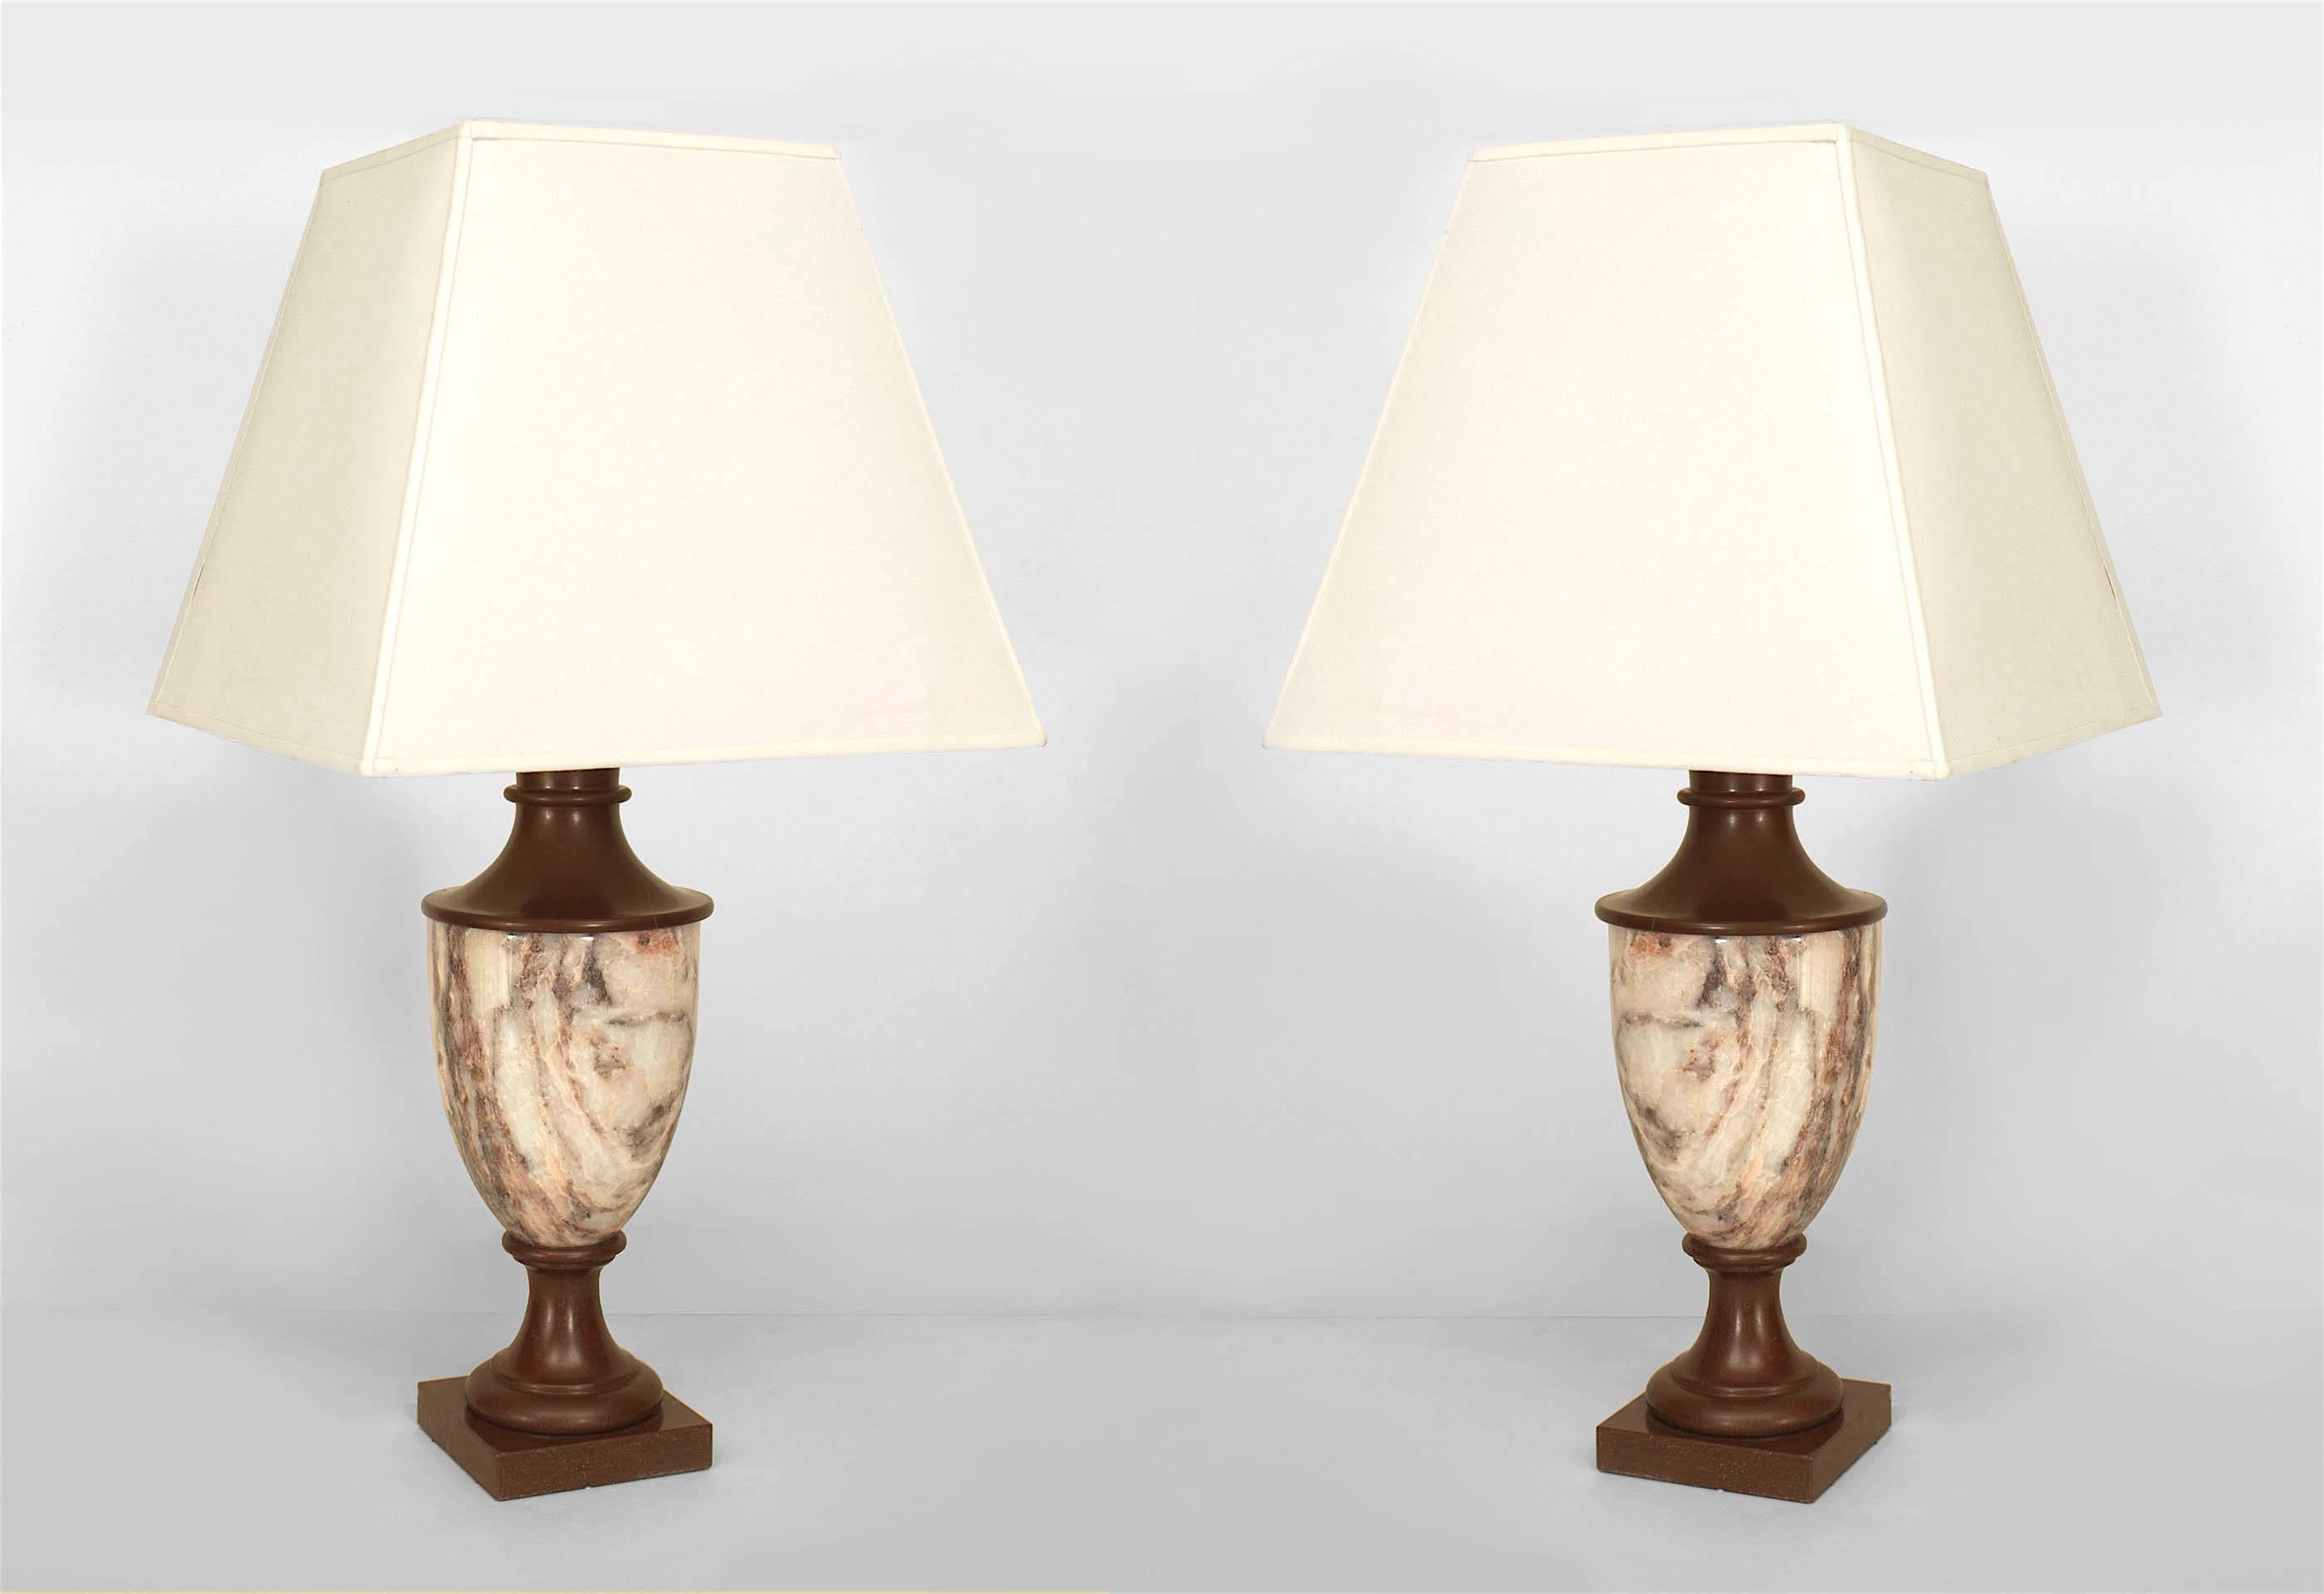 Pair of turn of the century Italian Neoclassical table lamps with vase form bases composed of quartz striated marble set rosso tops and square bases.